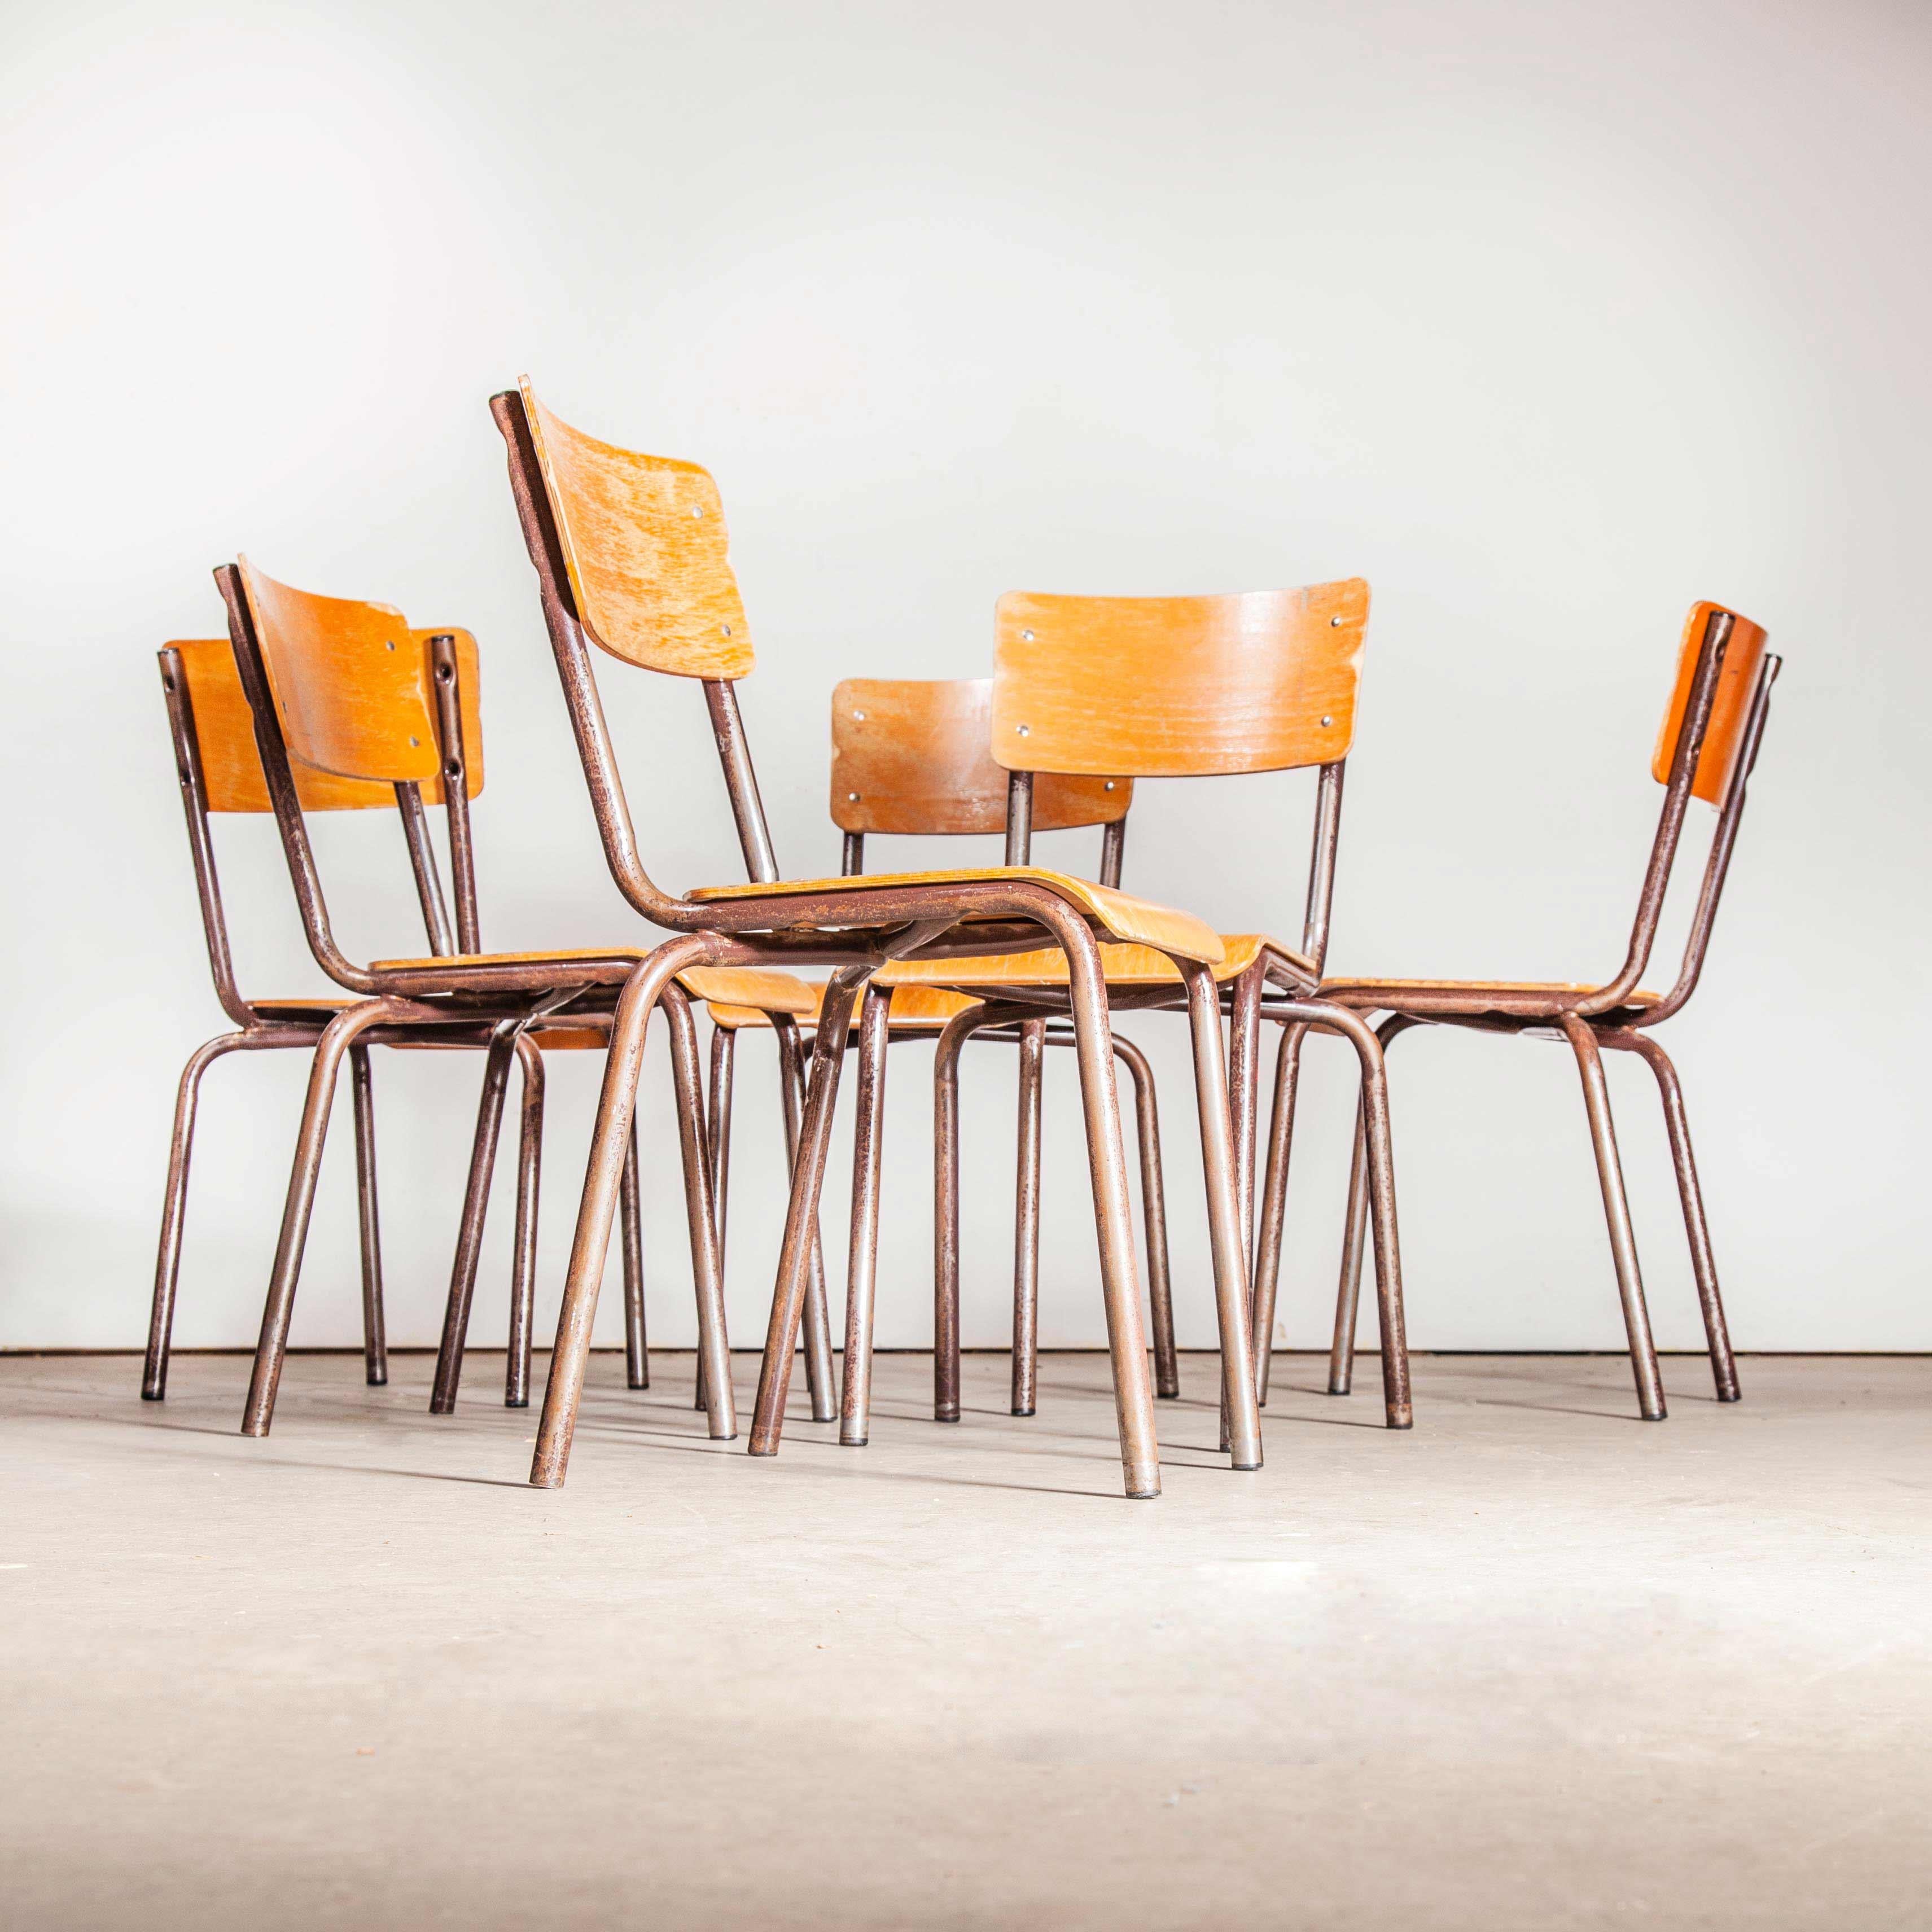 1950s French stacking metal frame school dining chairs, set of six
1950s French stacking metal frame school chairs, set of six. We have a huge batch of these brilliant practical stacking chairs. They have a strong metal frame with shaped beech